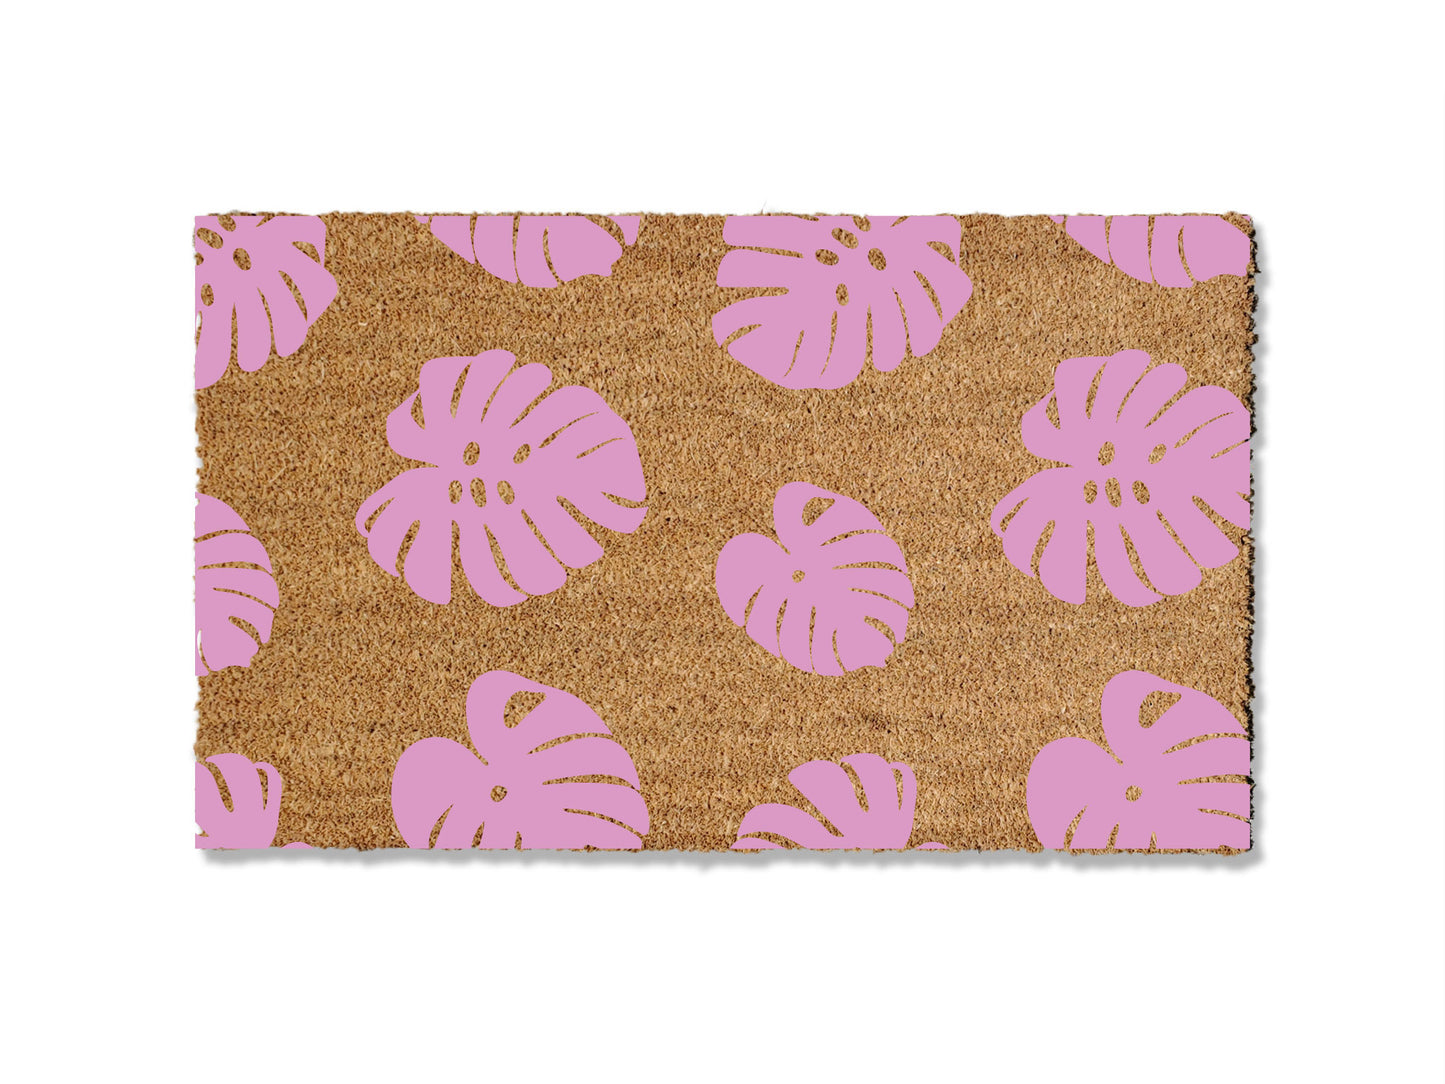 Transform your entrance with our coir doormat showcasing an all-over monstera leaf pattern. The perfect touch for a beach or tropical vibe, this stylish mat is available in multiple sizes and colors. Beyond its aesthetic appeal, it excels at trapping dirt, making it a functional and fashionable addition to enhance your entryway.